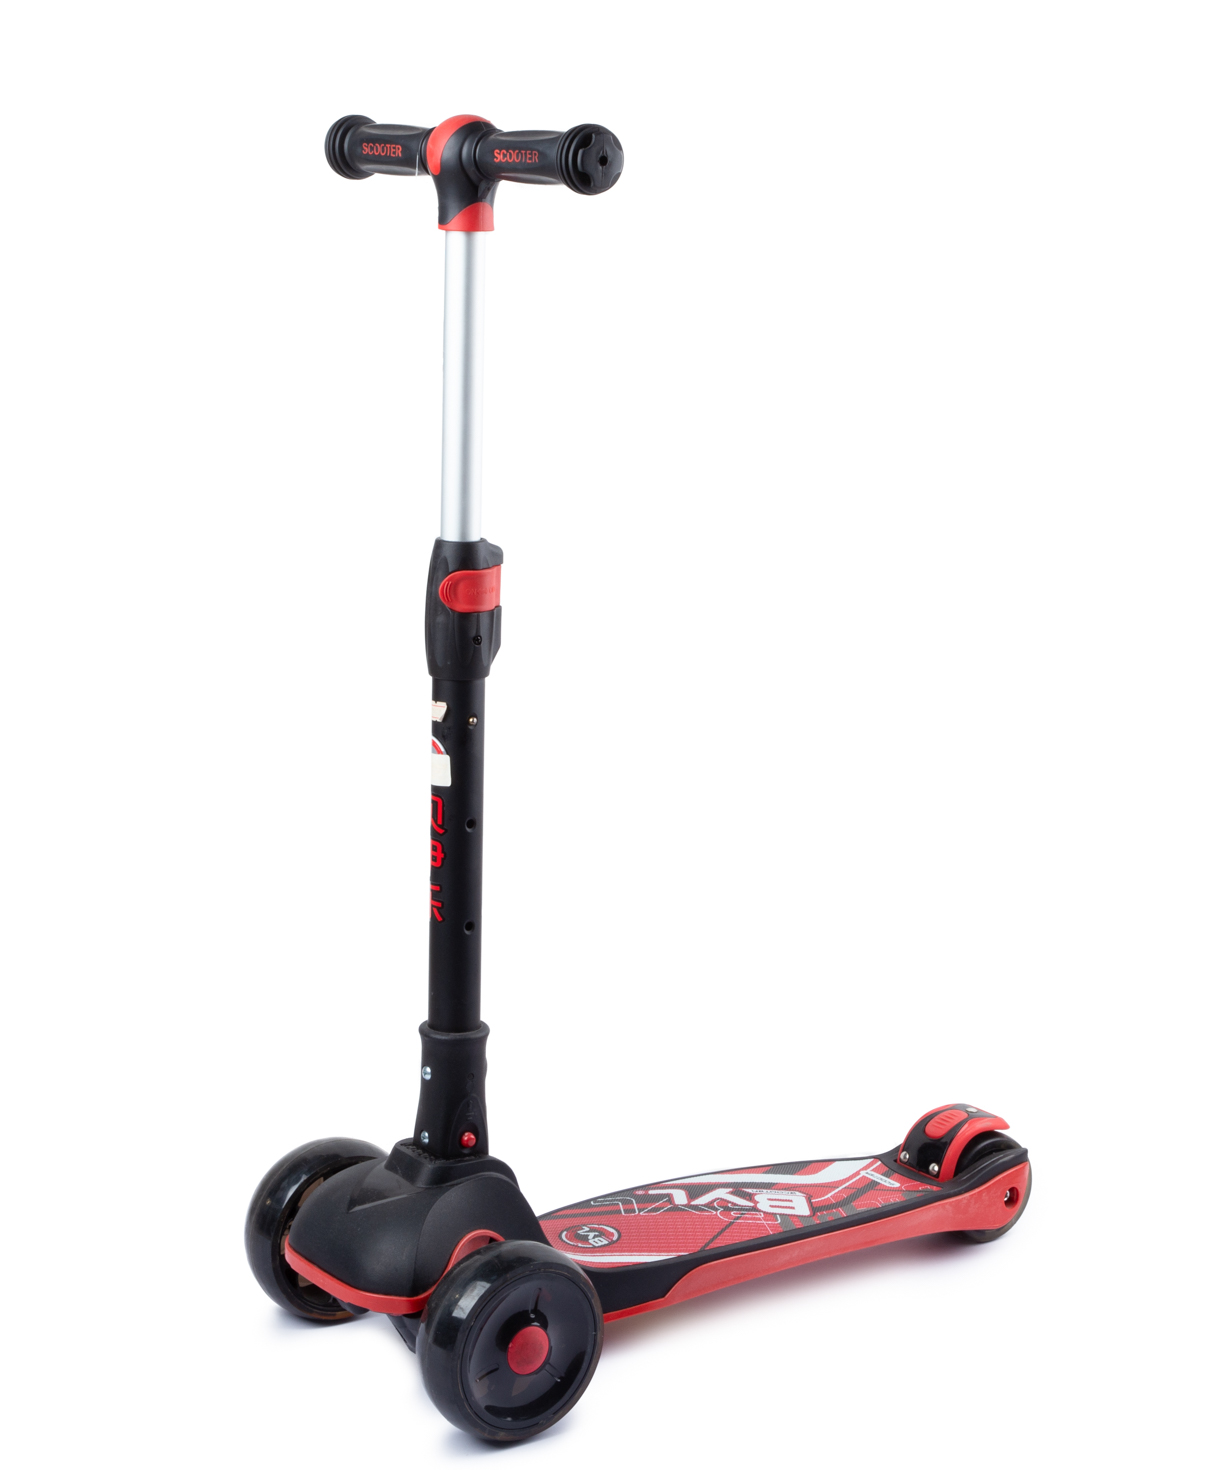 Scooter PE-9921 with light effect